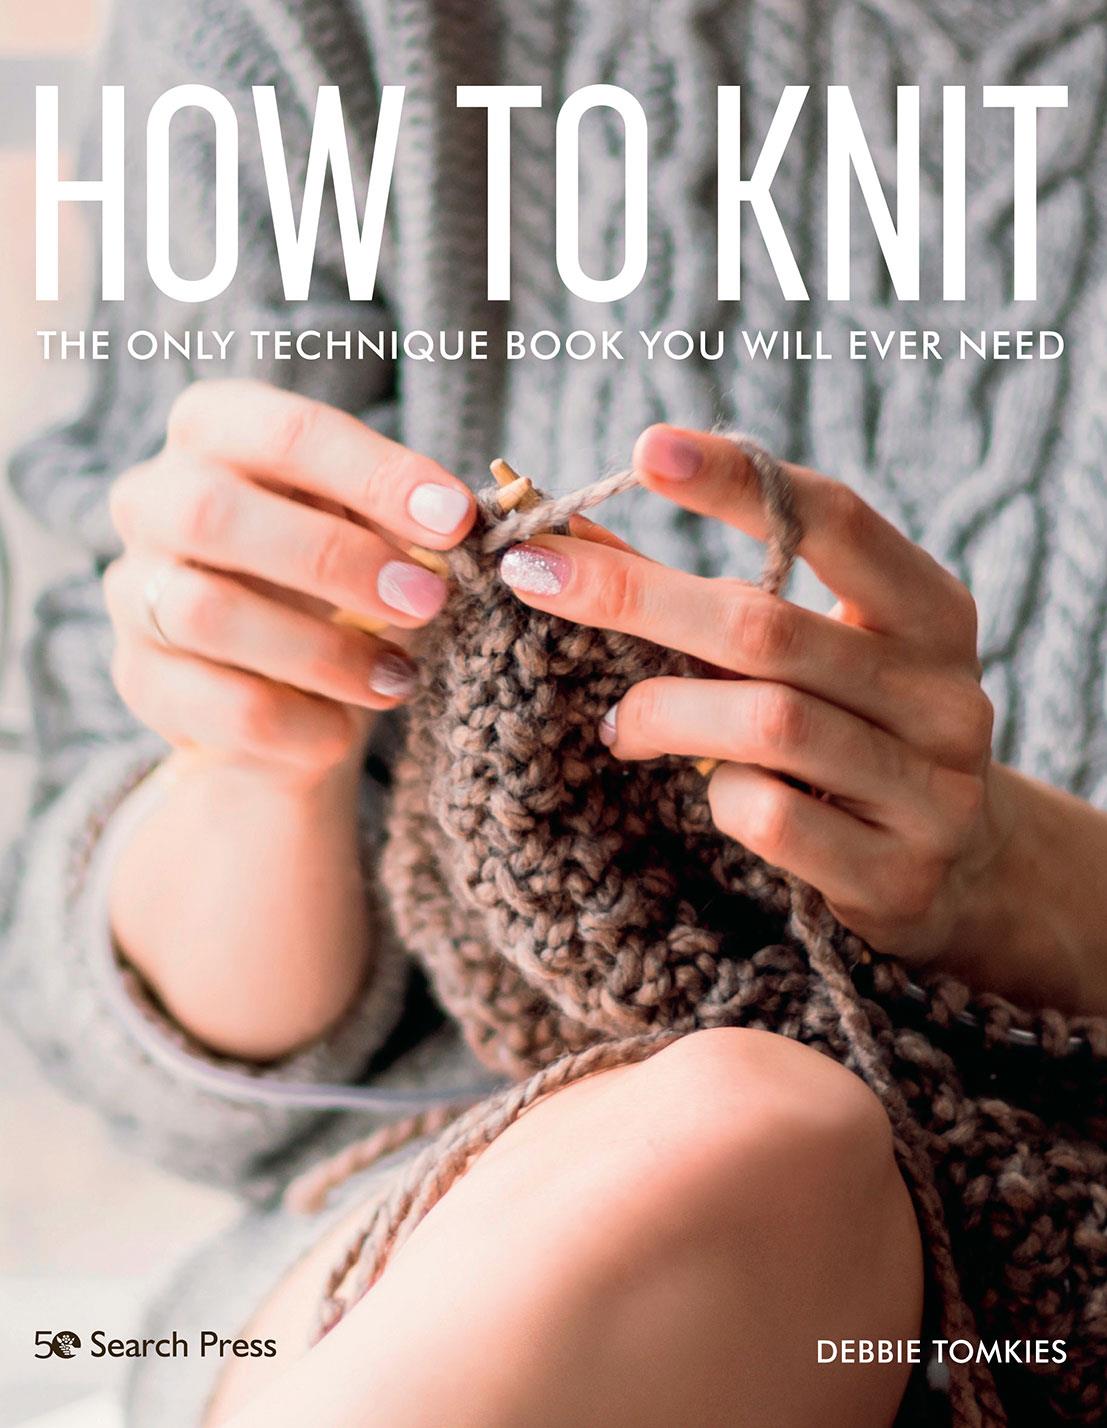 How To Knit - Pattern Book by Debbie Tomkies